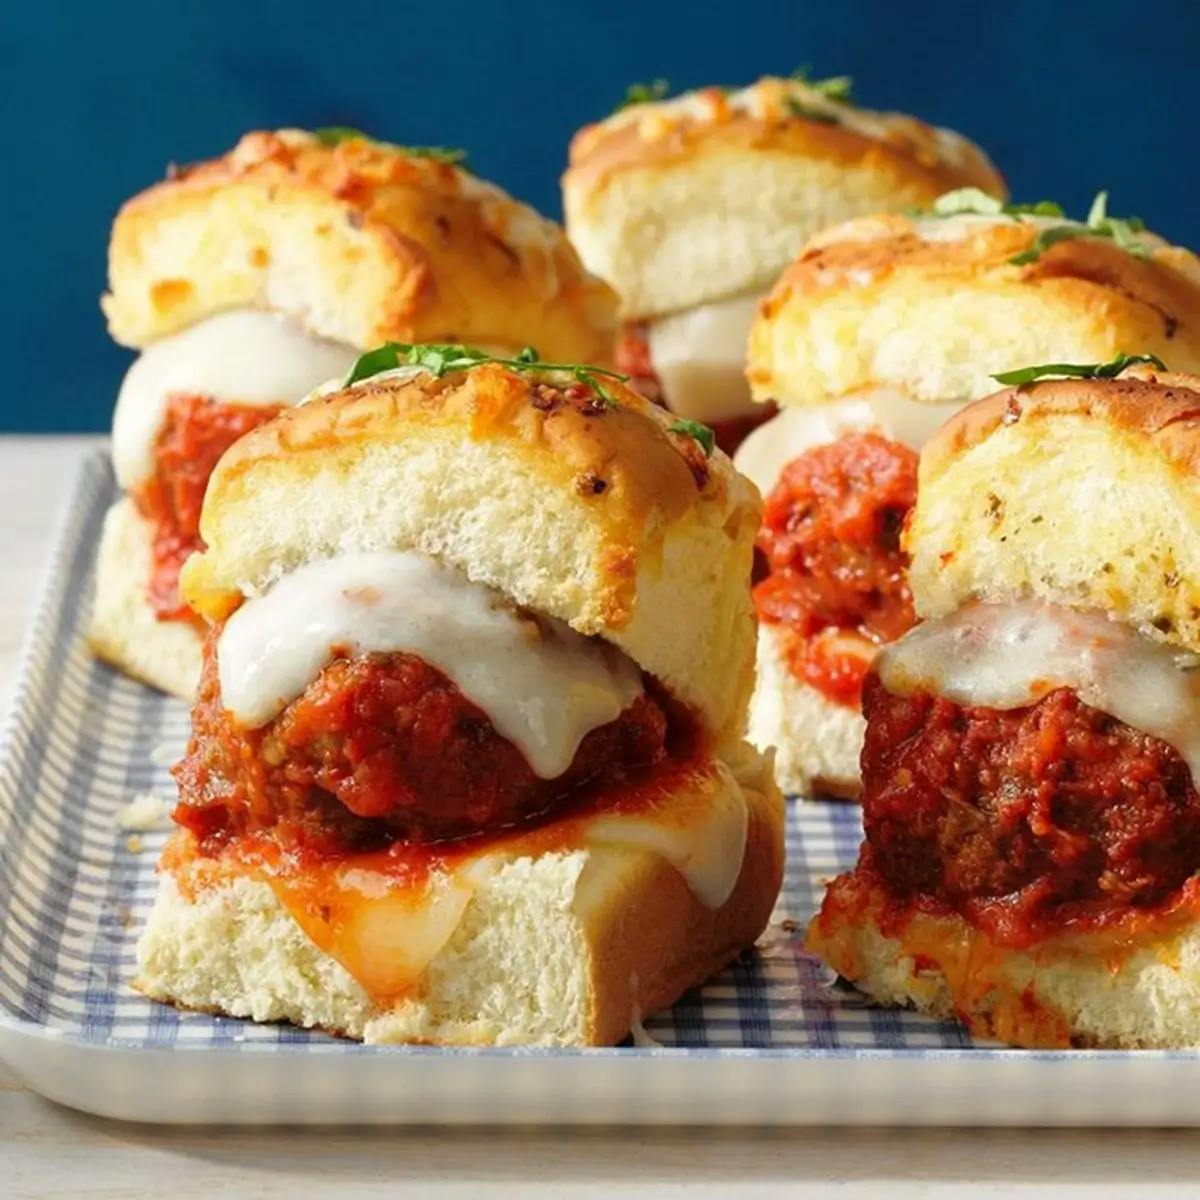 Meatball sliders at a Super Bowl party. Hawaiian rolls containing meatballs and mozzarella cheese.